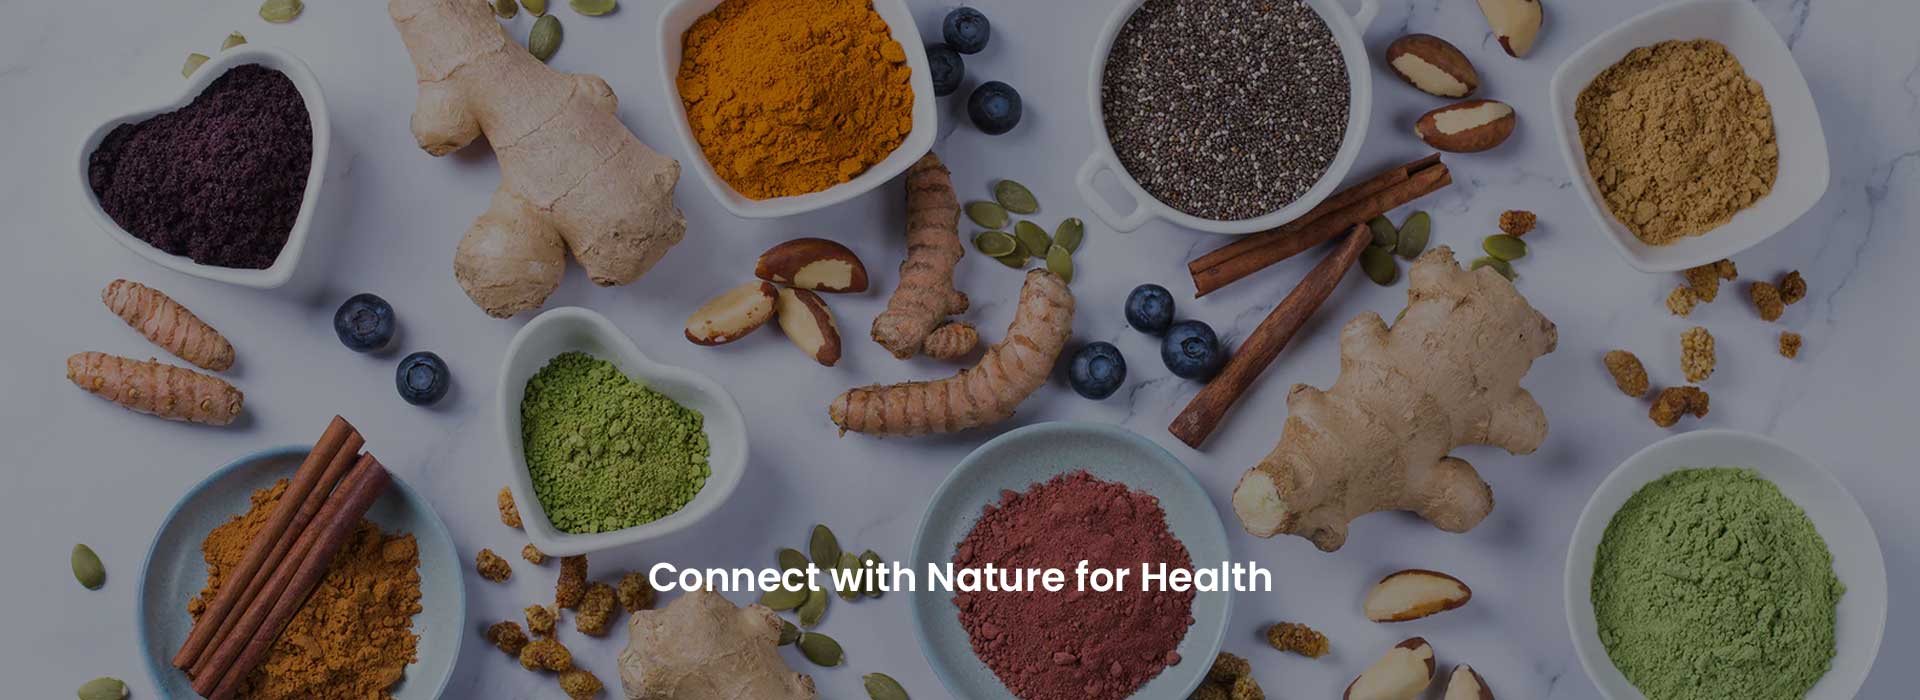 Connect with Nature for Health